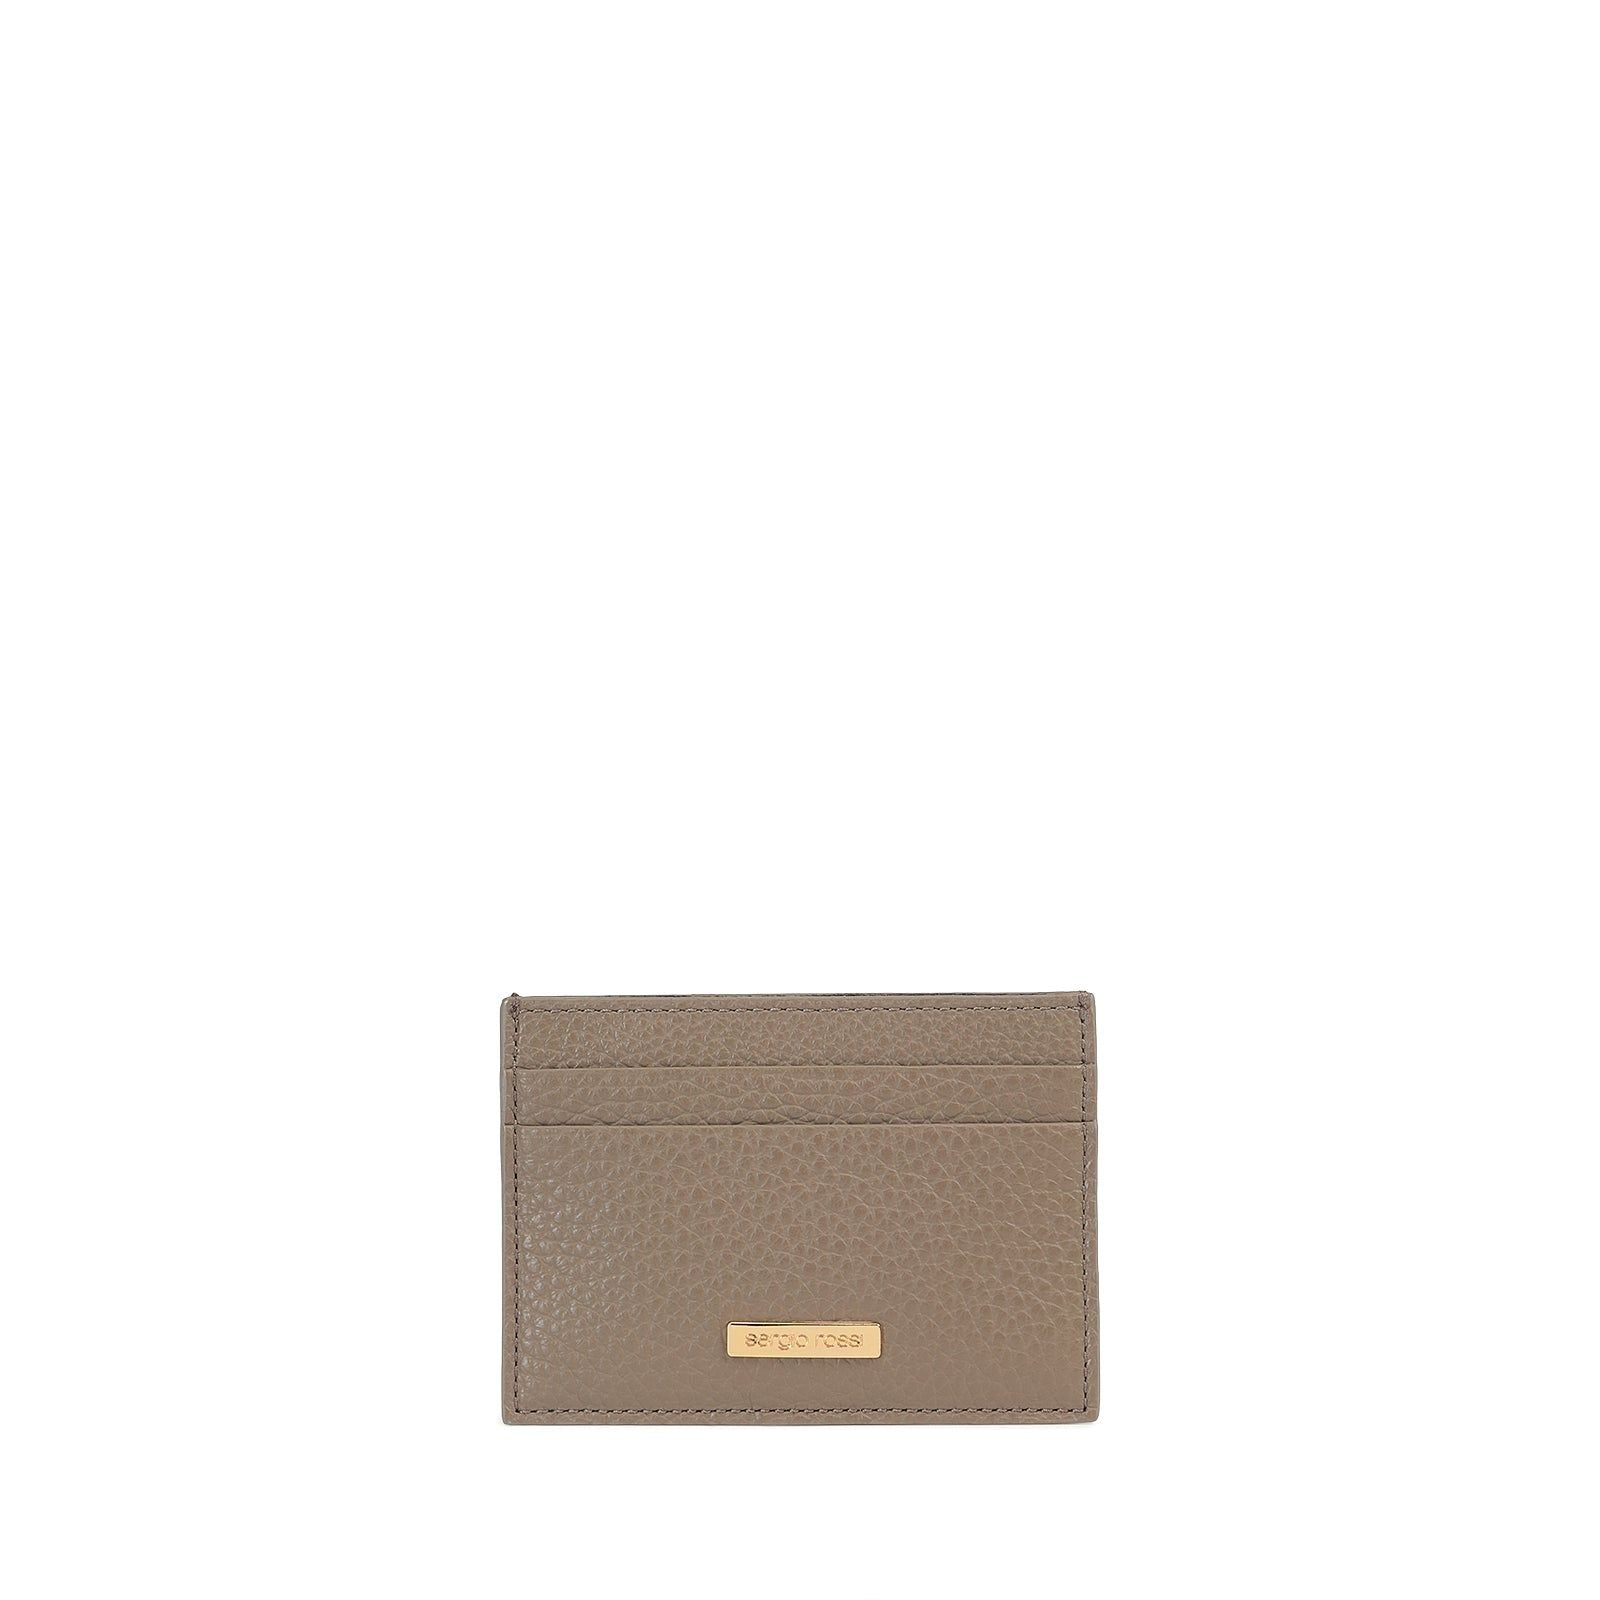 Gruppo A card case - Taupe